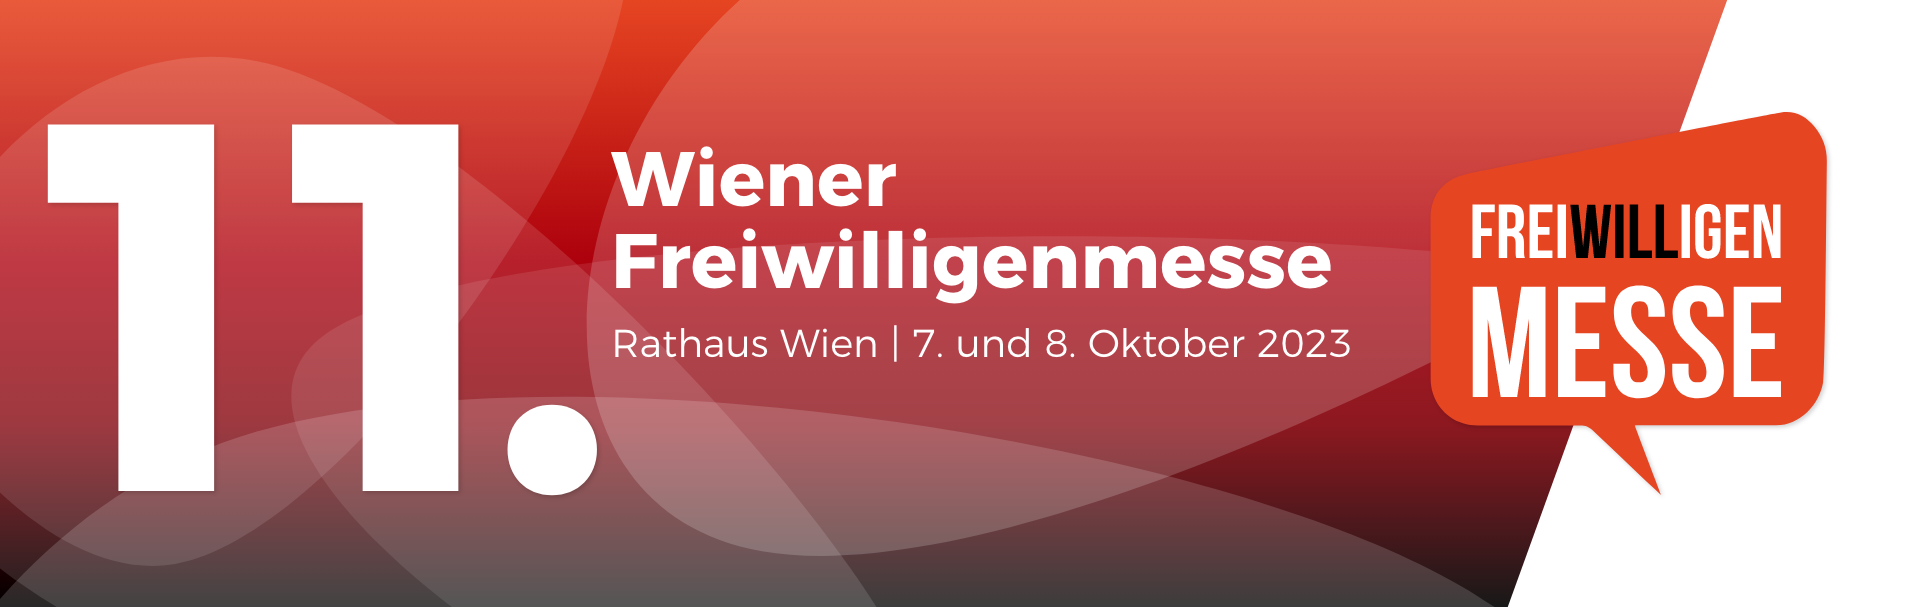 (c) Freiwilligenmesse.at